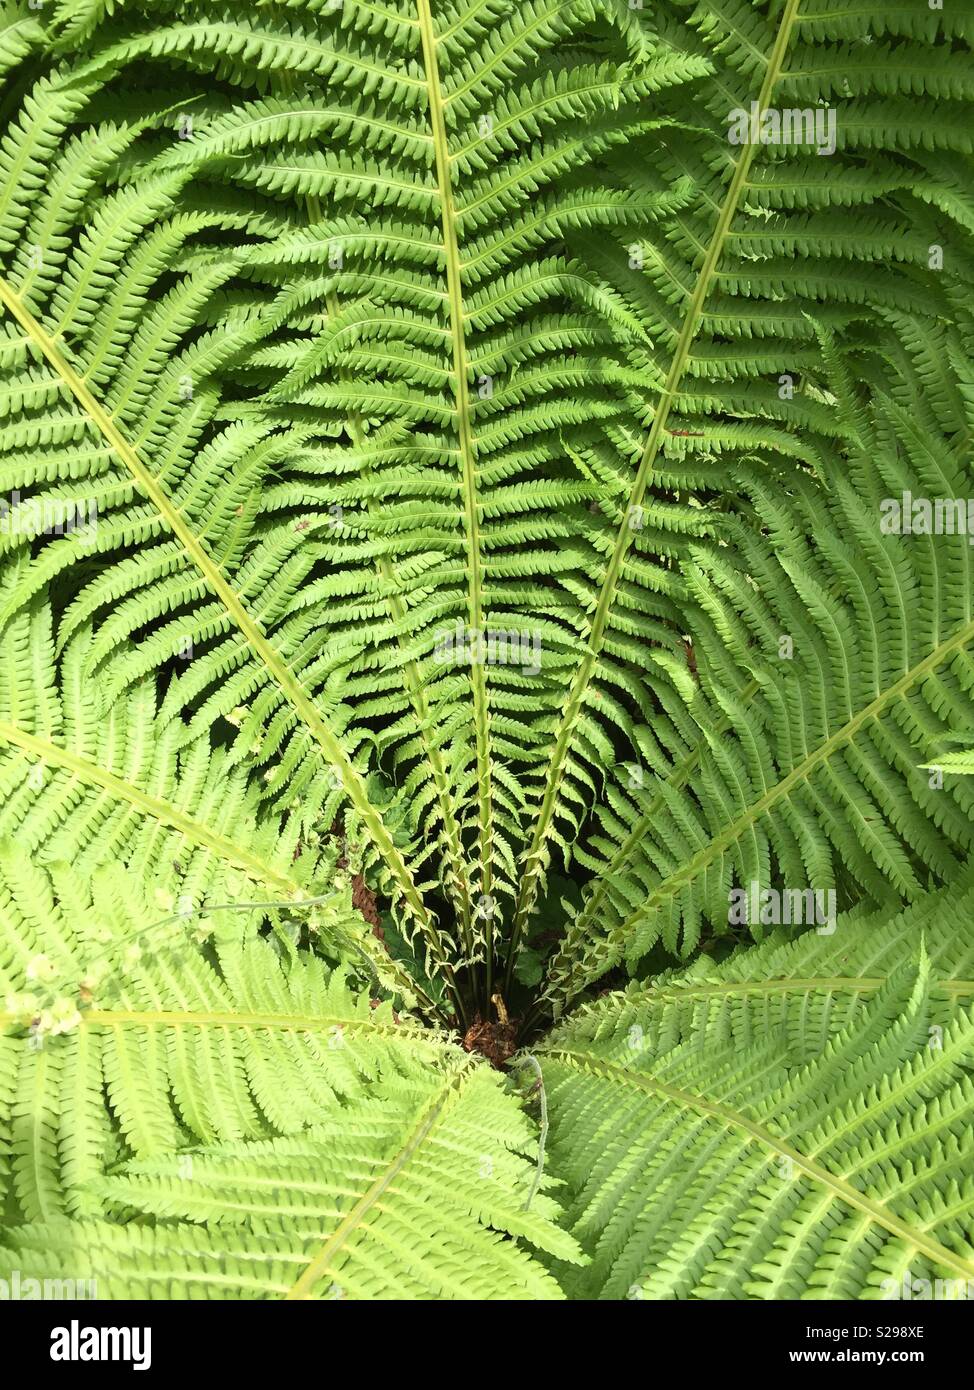 Centre and expanding foliage of male fern Stock Photo